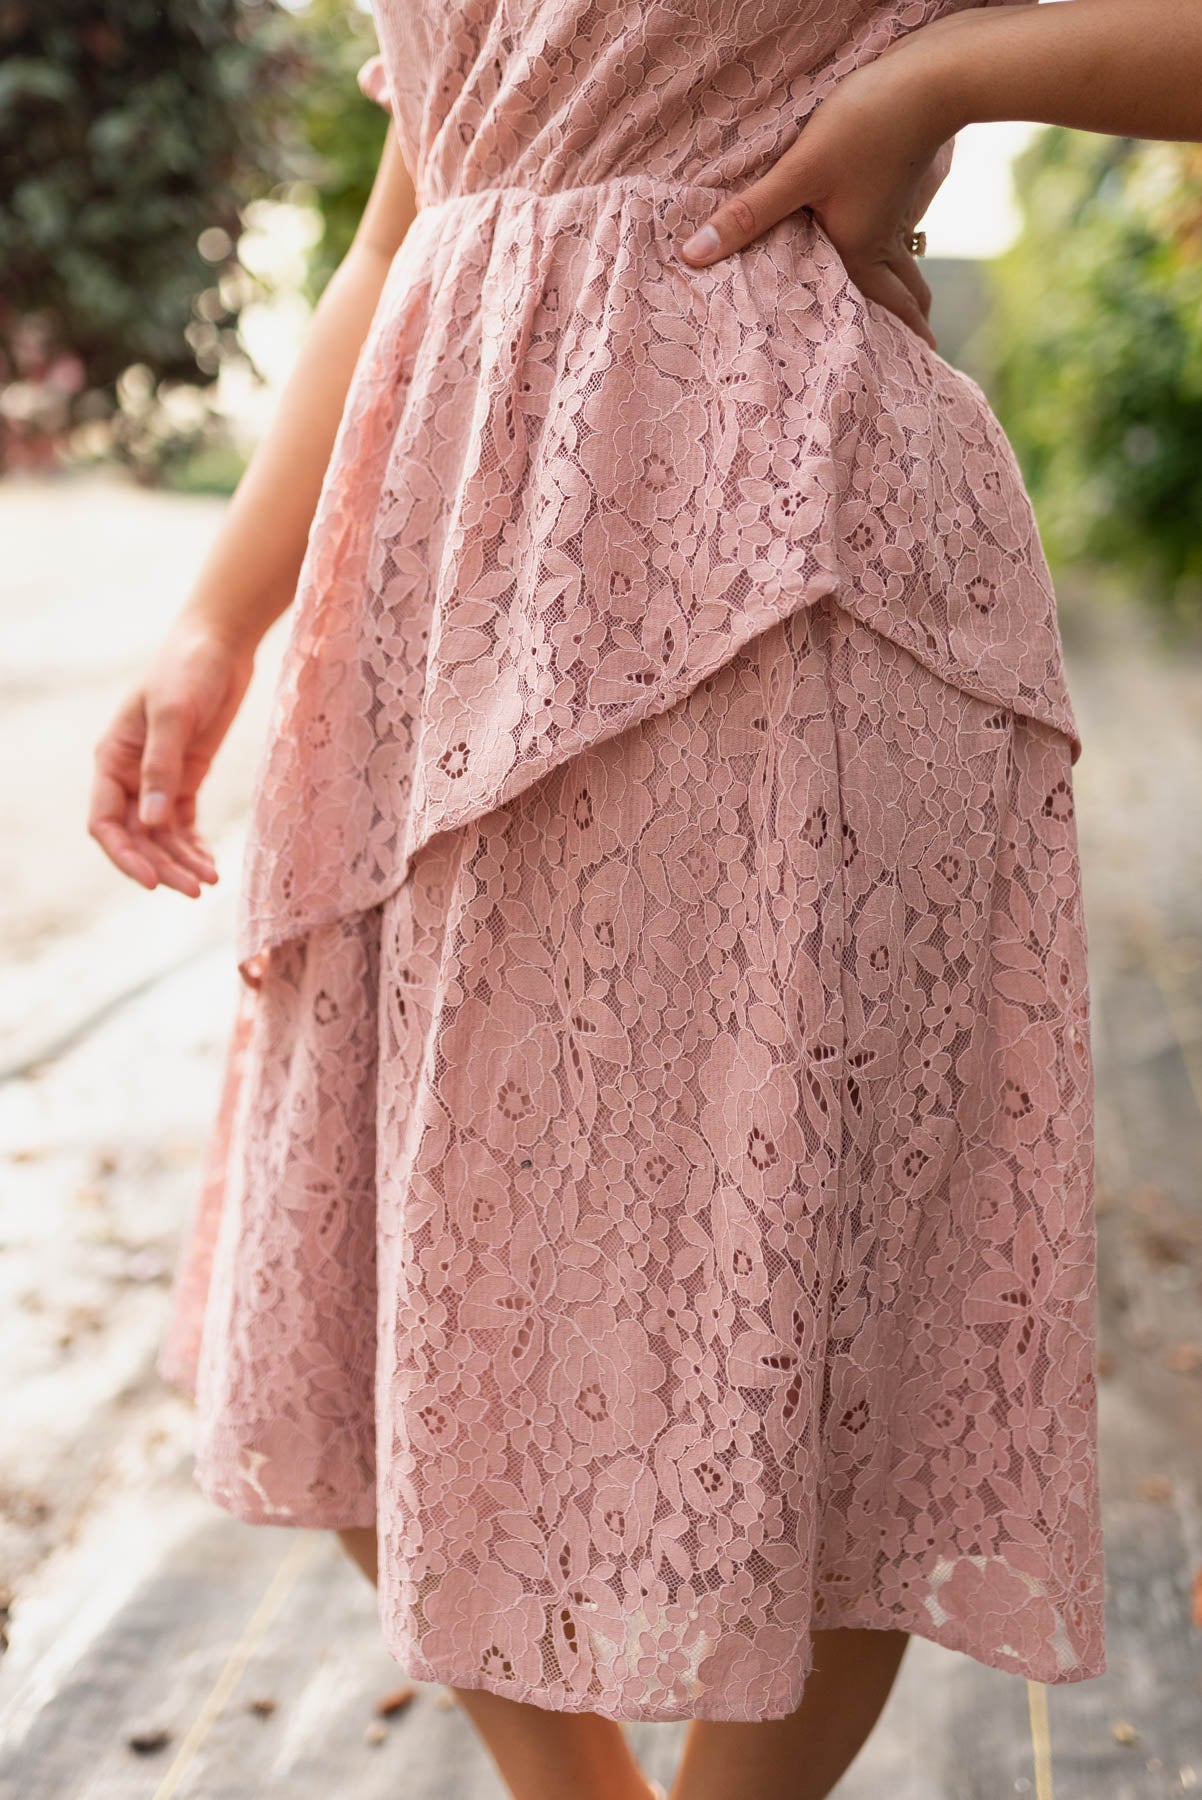 Close up of the lace skirt on the dusty pink lace tiered dress